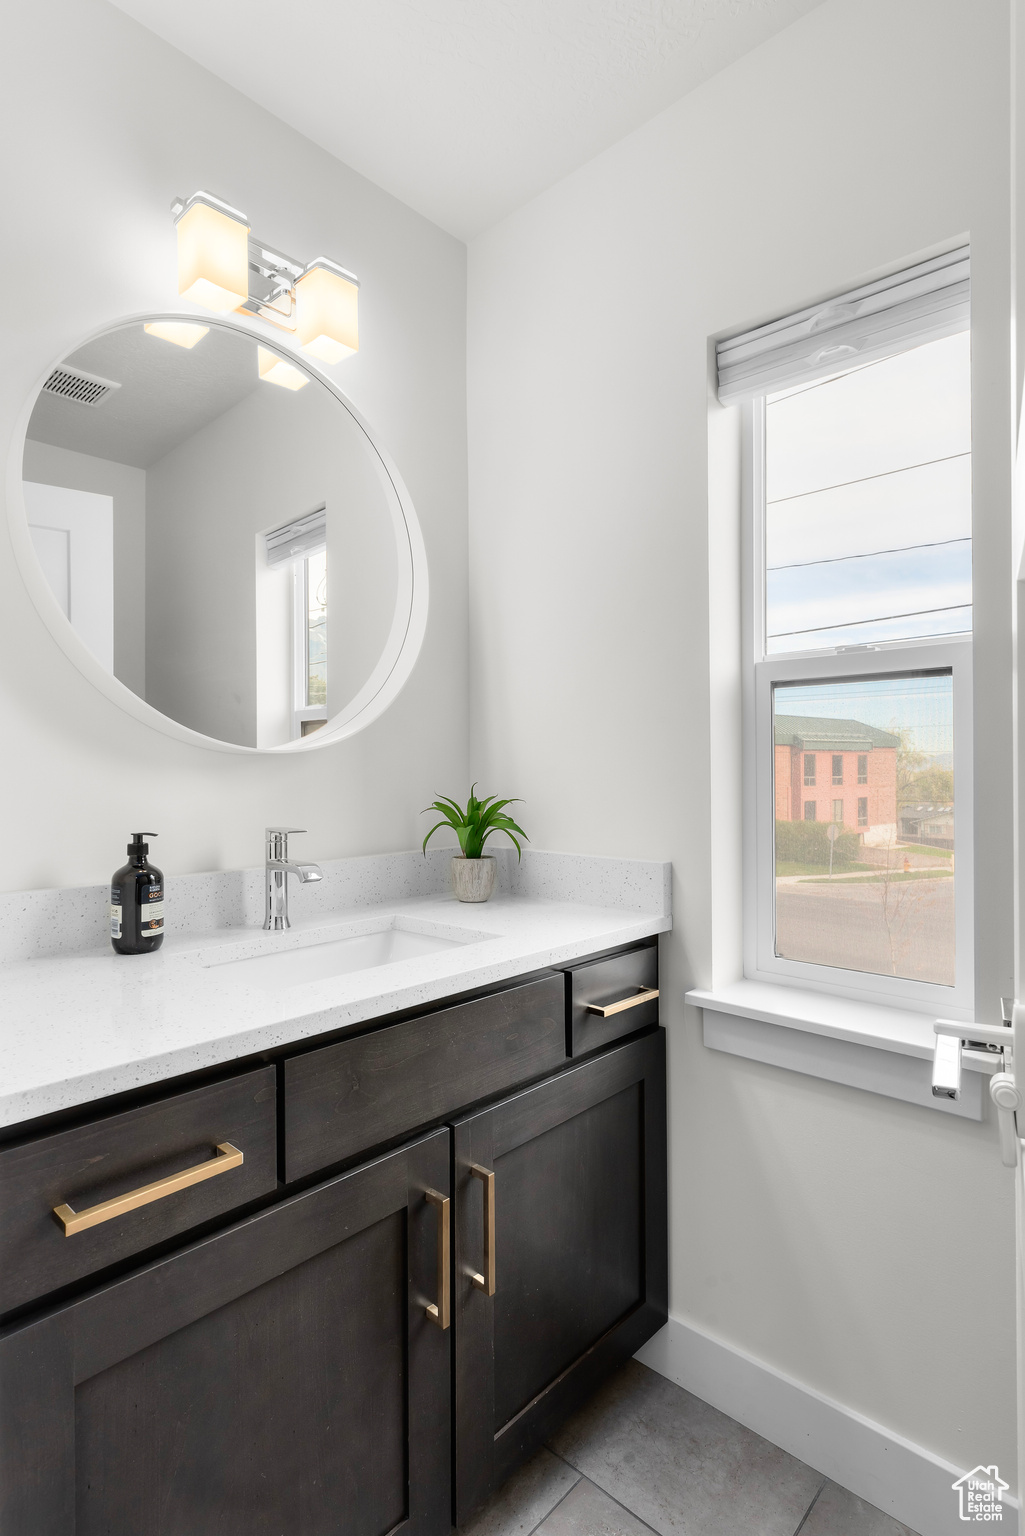 Half Bathroom featuring a wealth of natural light, tile floors, and oversized vanity